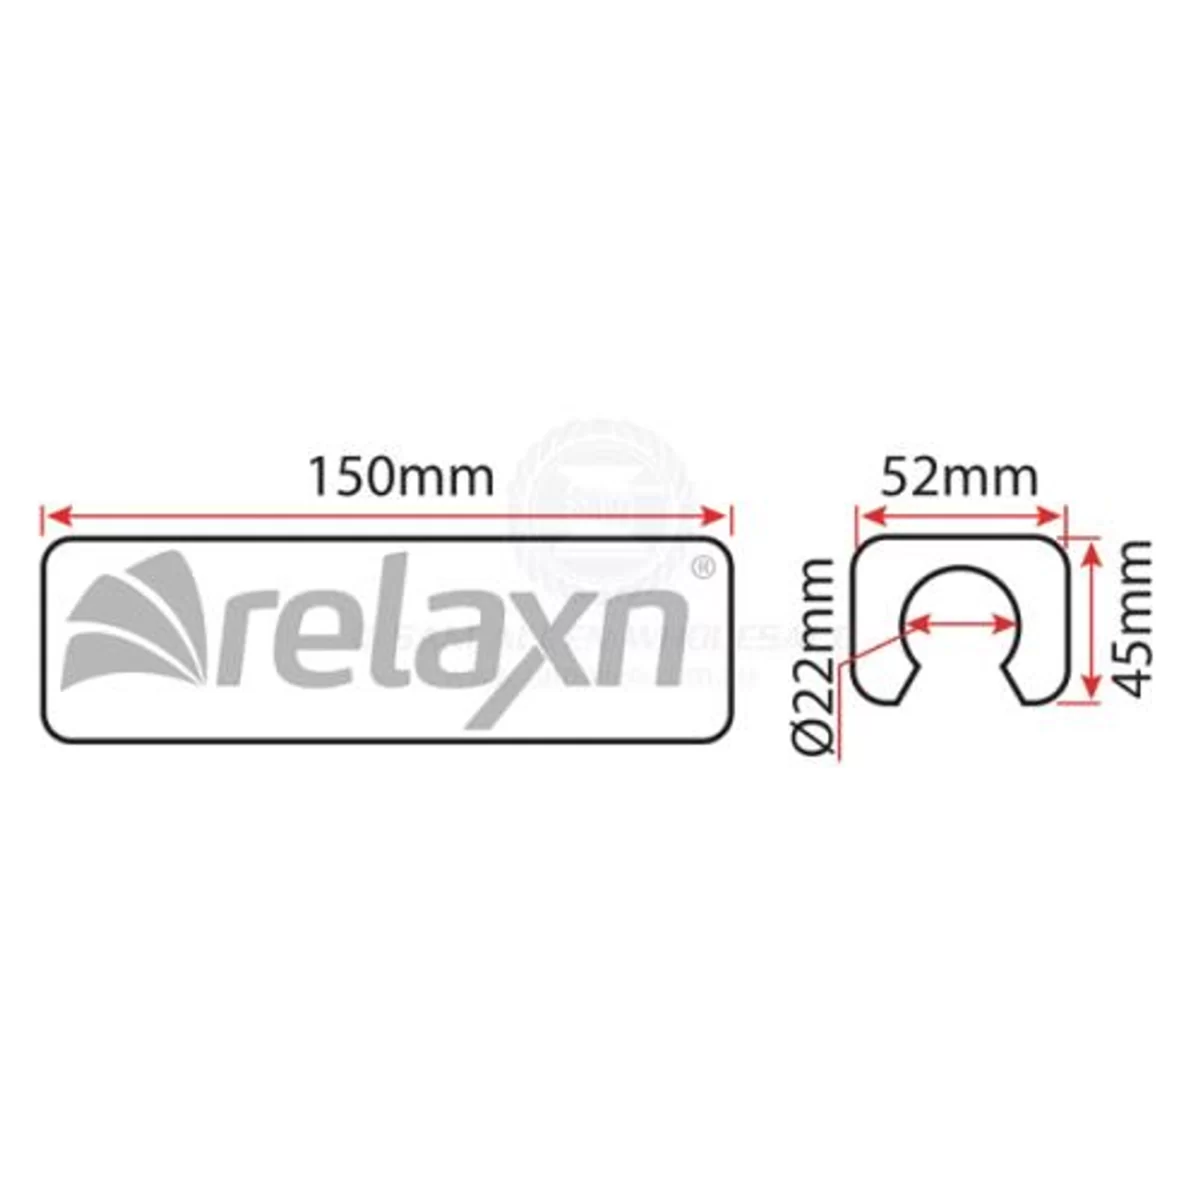 Relaxn Trim Tab Motor Support Dimensions